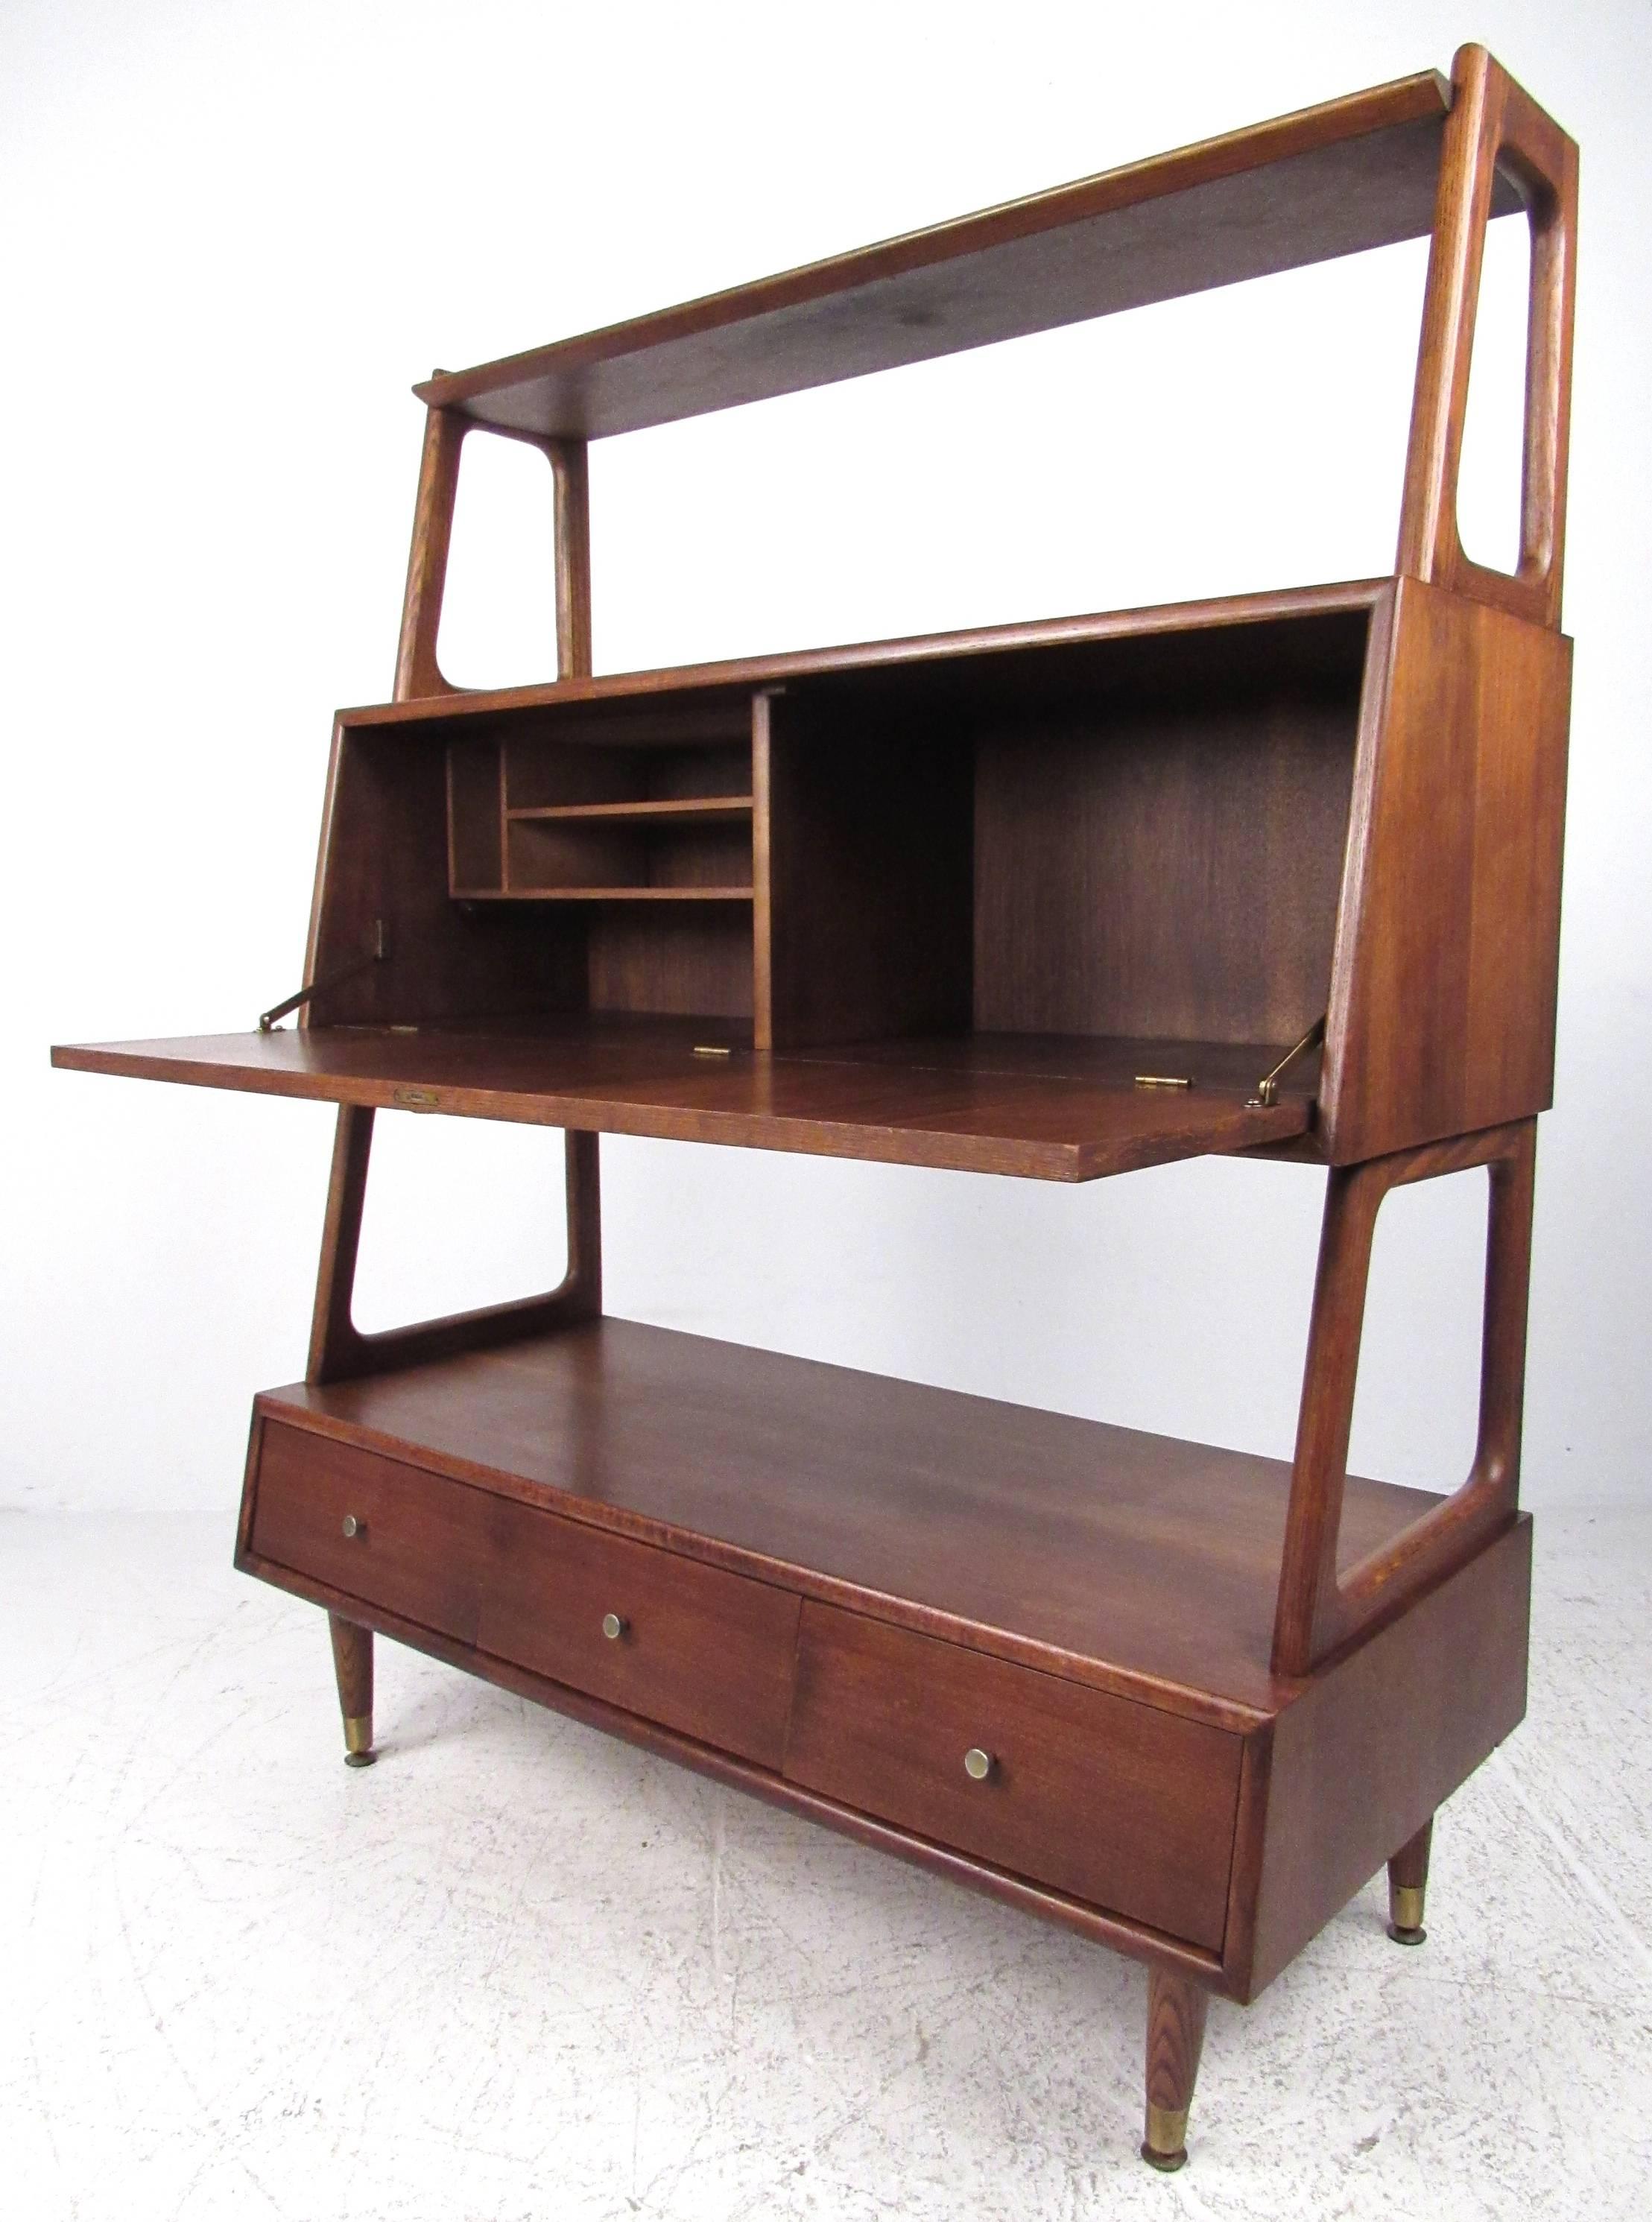 Unique combination drop front desk unit with three-tier bookshelf and three storage drawers at base. Walnut and oak construction with brass hardware. Please confirm item location. Second similar unit also available, contact for details. 